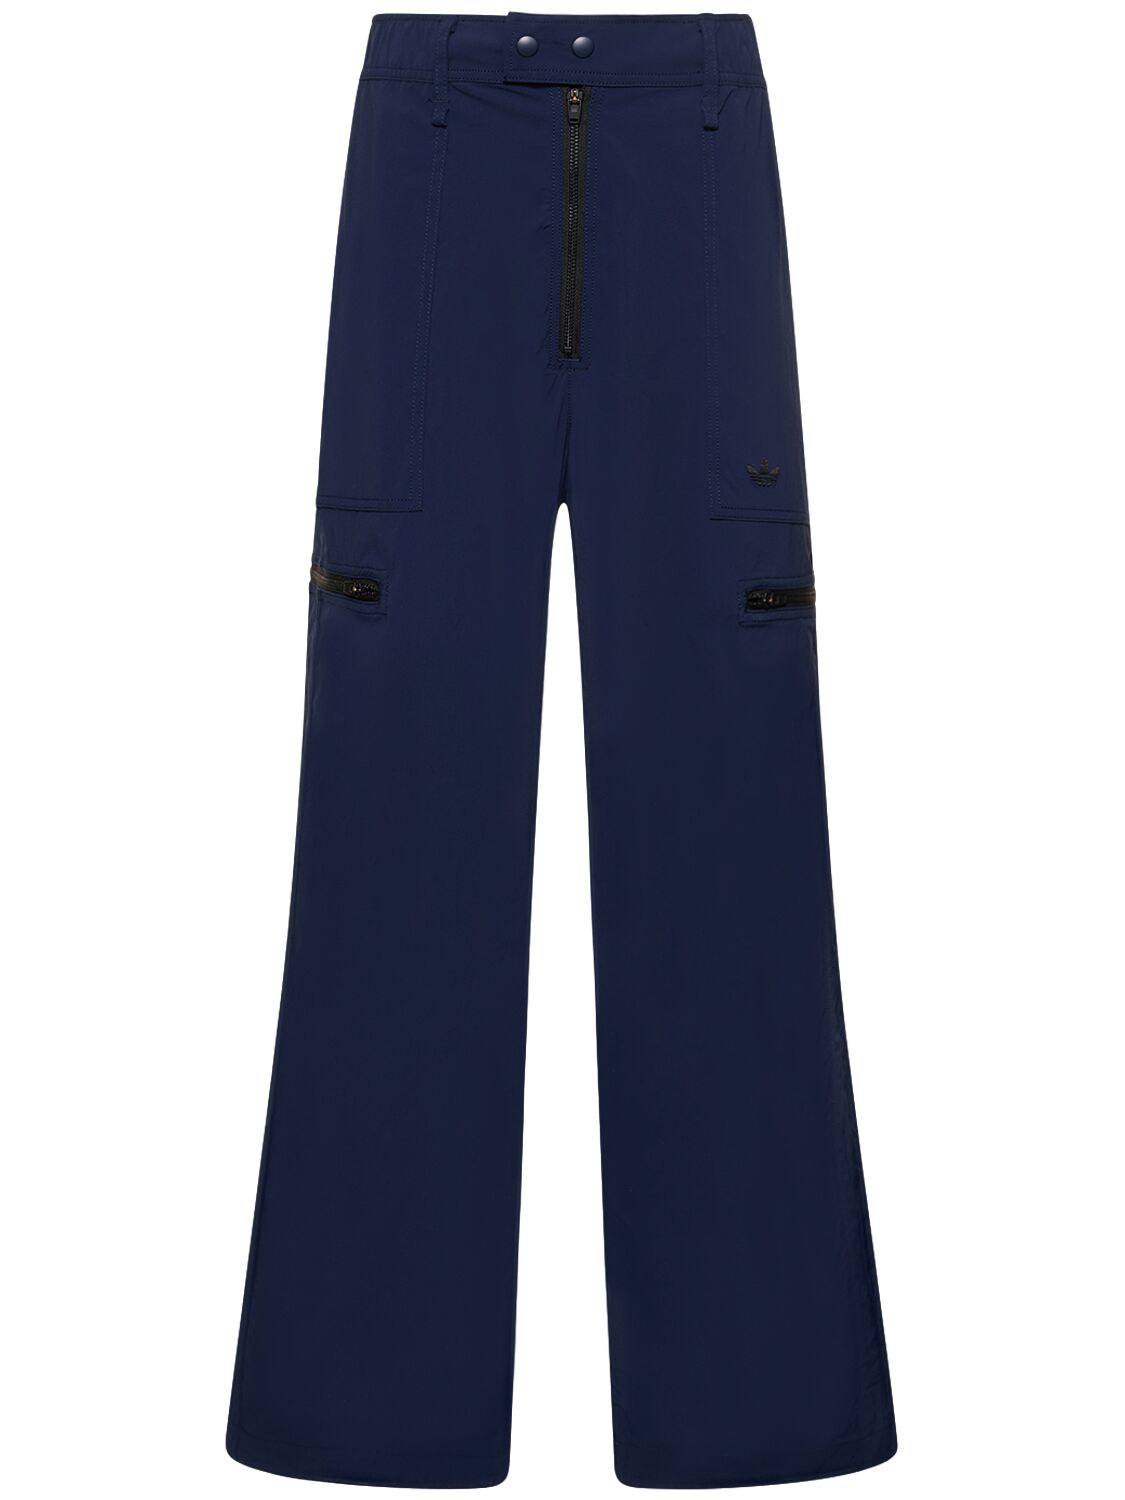 Image of Wales Bonner Recycled Tech Cargo Pants